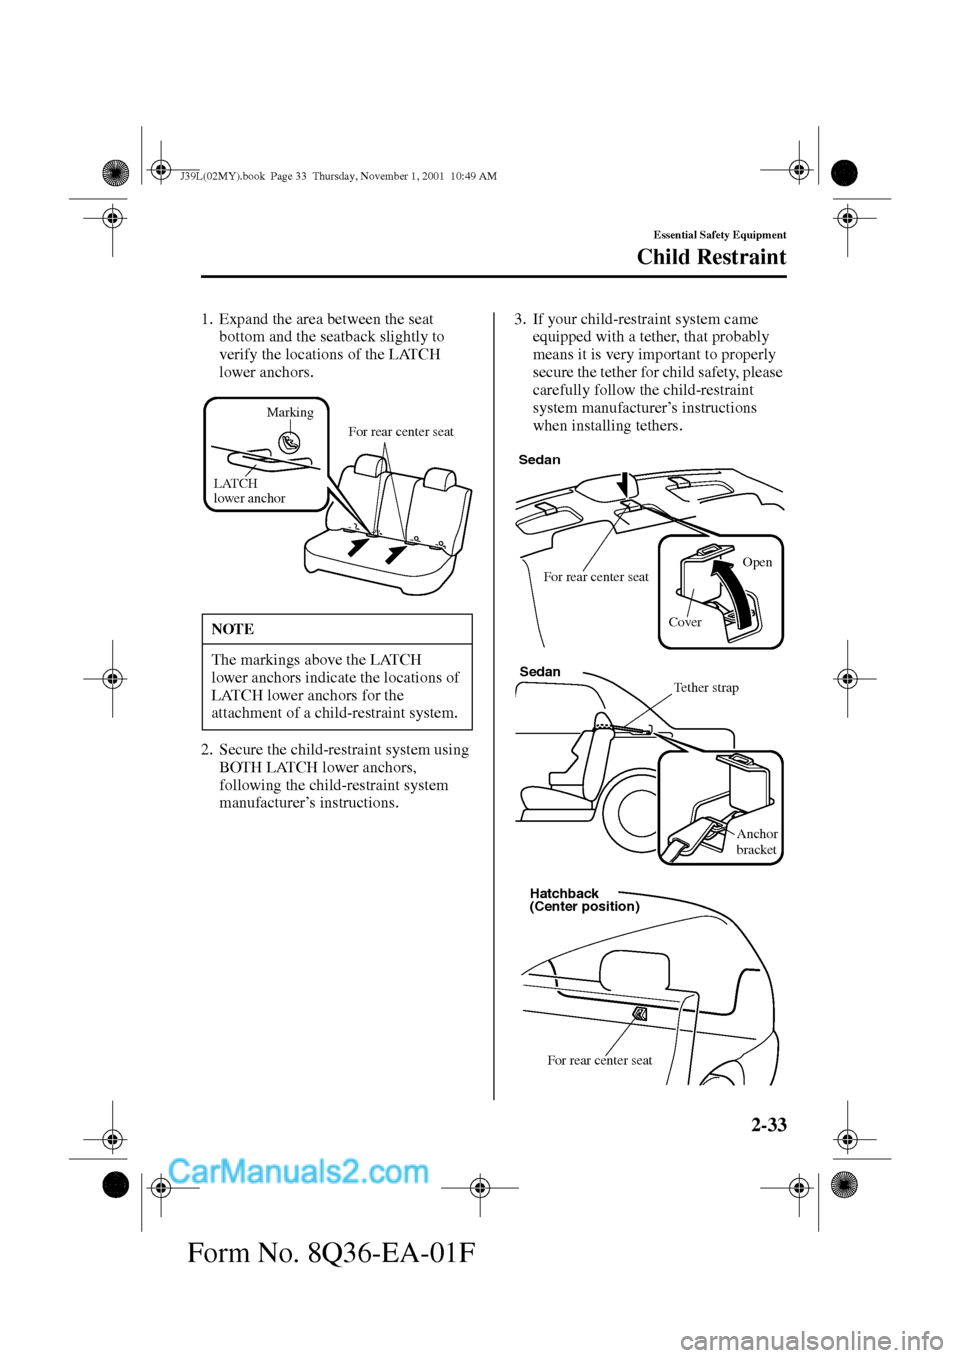 MAZDA MODEL PROTÉGÉ 2002   (in English) Service Manual 2-33
Essential Safety Equipment
Child Restraint
Form No. 8Q36-EA-01F
1. Expand the area between the seat 
bottom and the seatback slightly to 
verify the locations of the LATCH 
lower anchors.
2. Secu